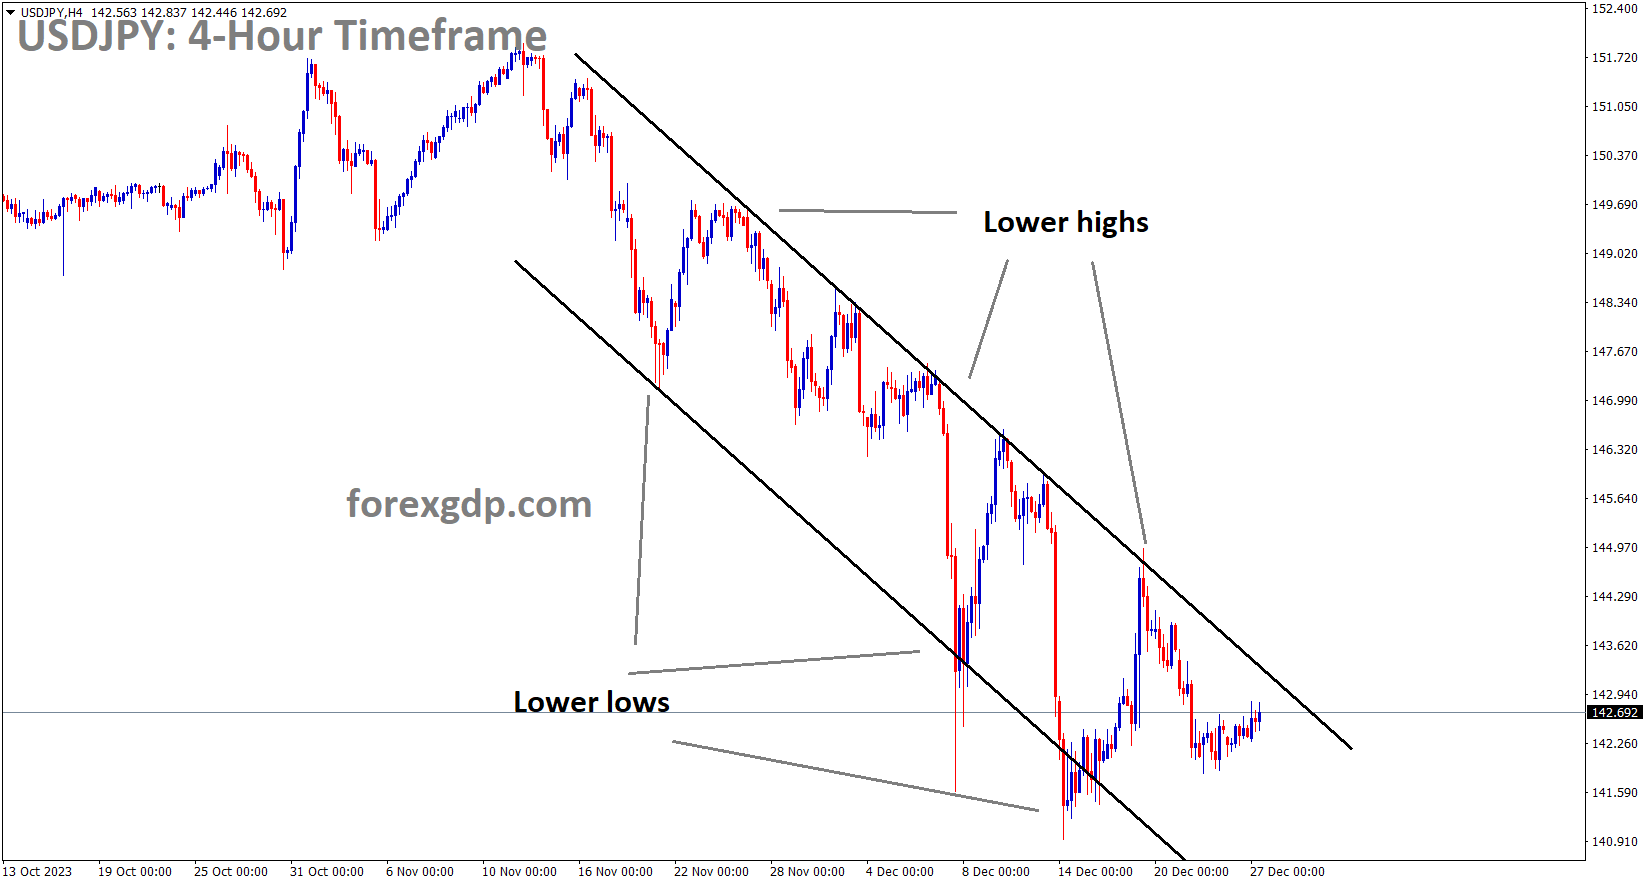 USDPY is moving in the Descending channel and the market has reached the lower high area of the channel